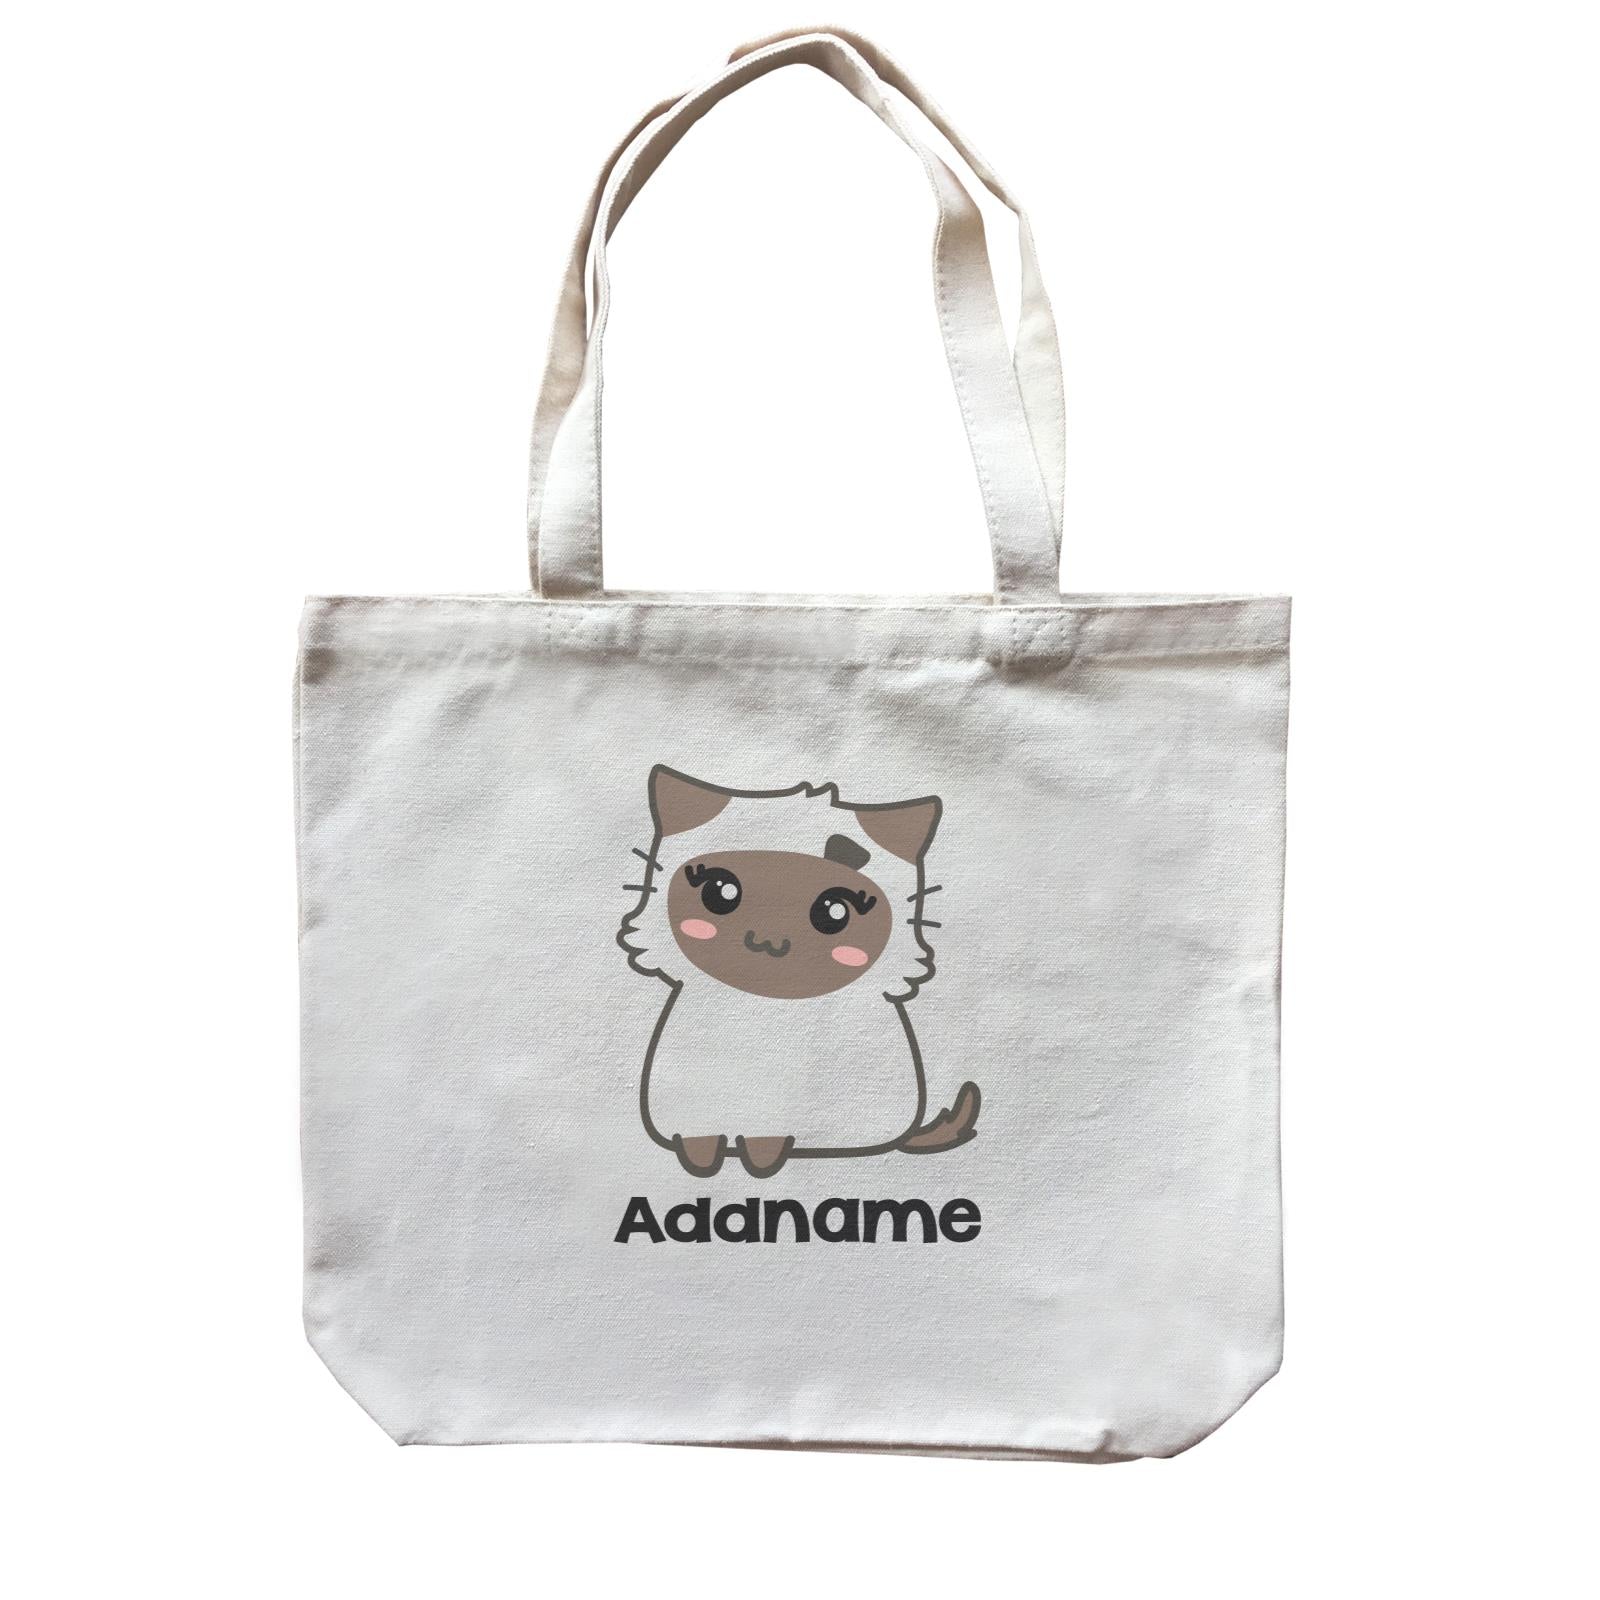 Drawn Adorable Cats White & Chocolate Addname Canvas Bag